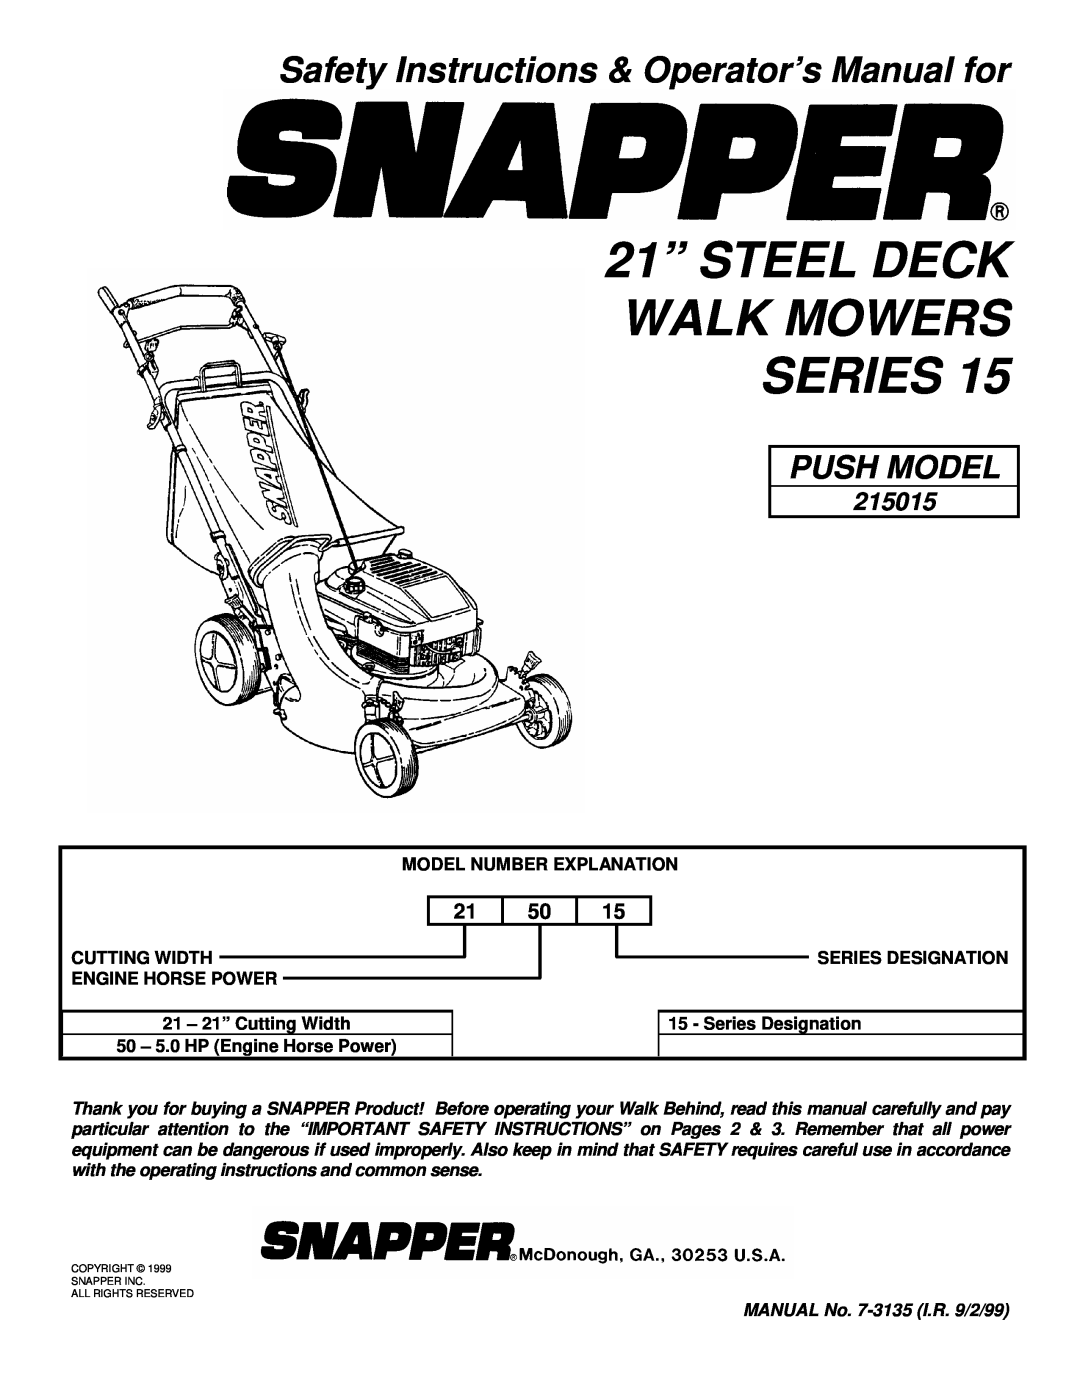 Snapper 215015 important safety instructions 21” STEEL DECK WALK MOWERS SERIES, Push Model 